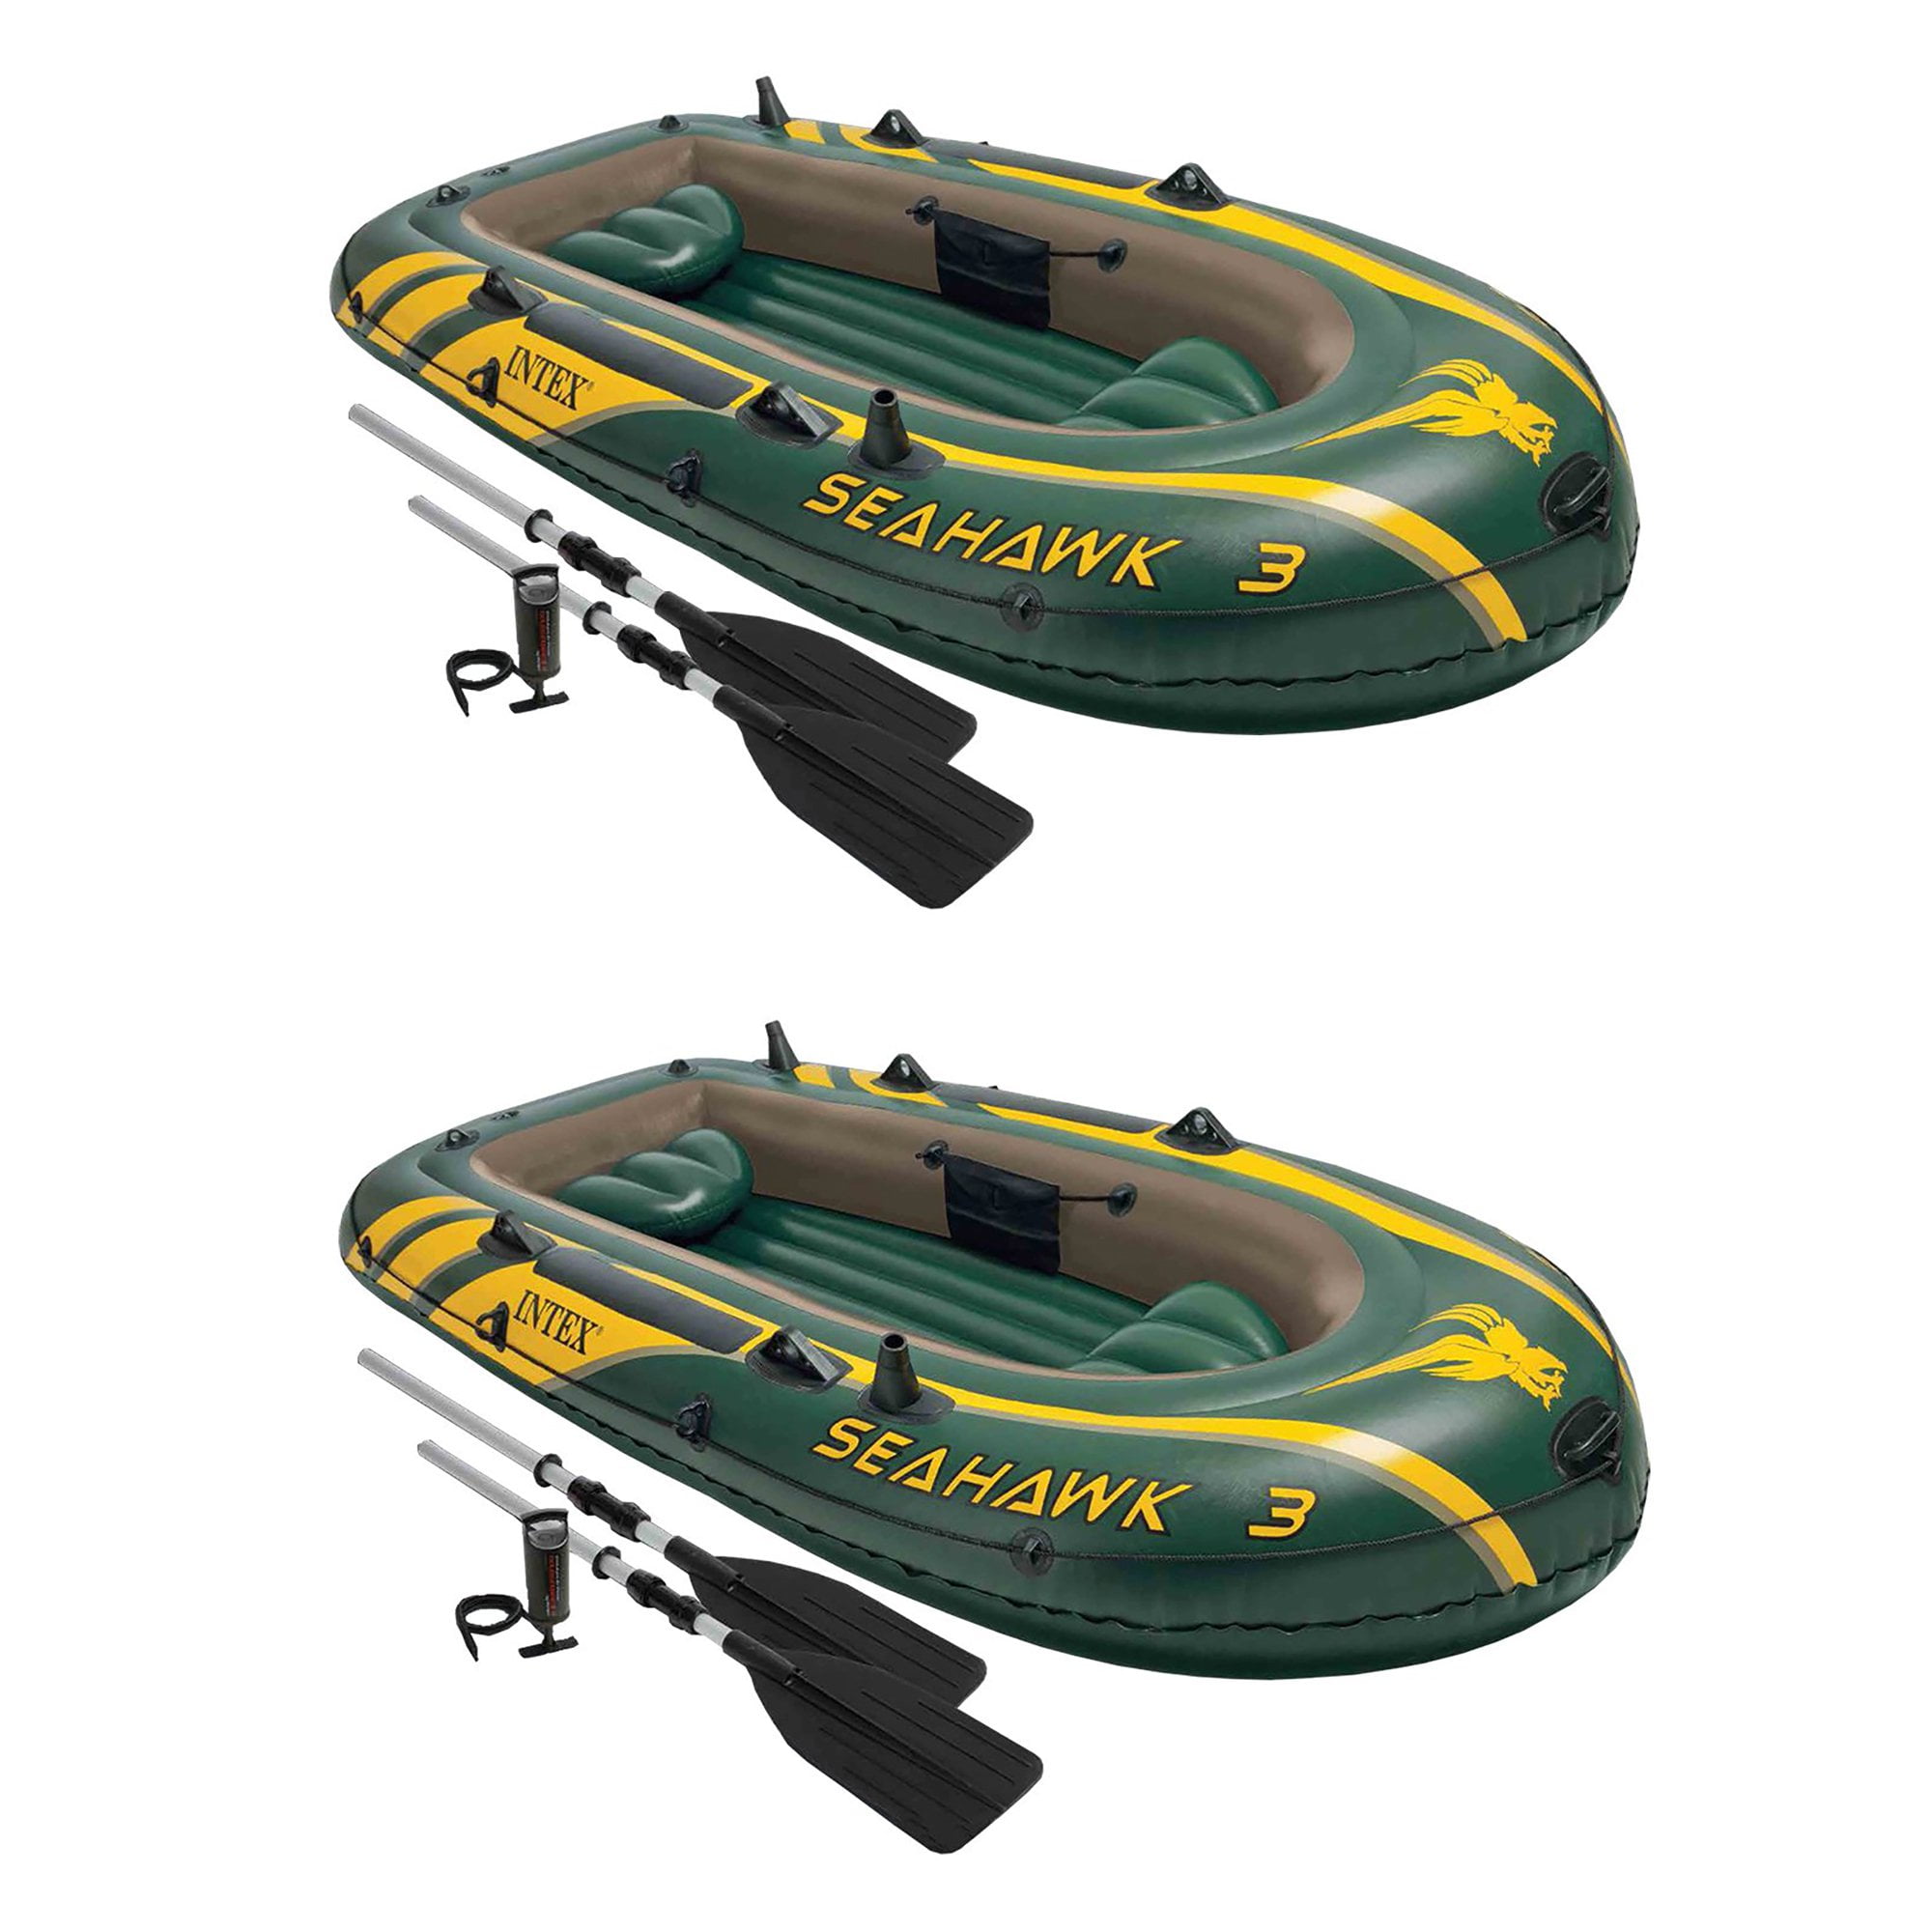 Blue Intex 68370EP Challenger 3 Inflatable Raft Boat Set With Pump And Oars 